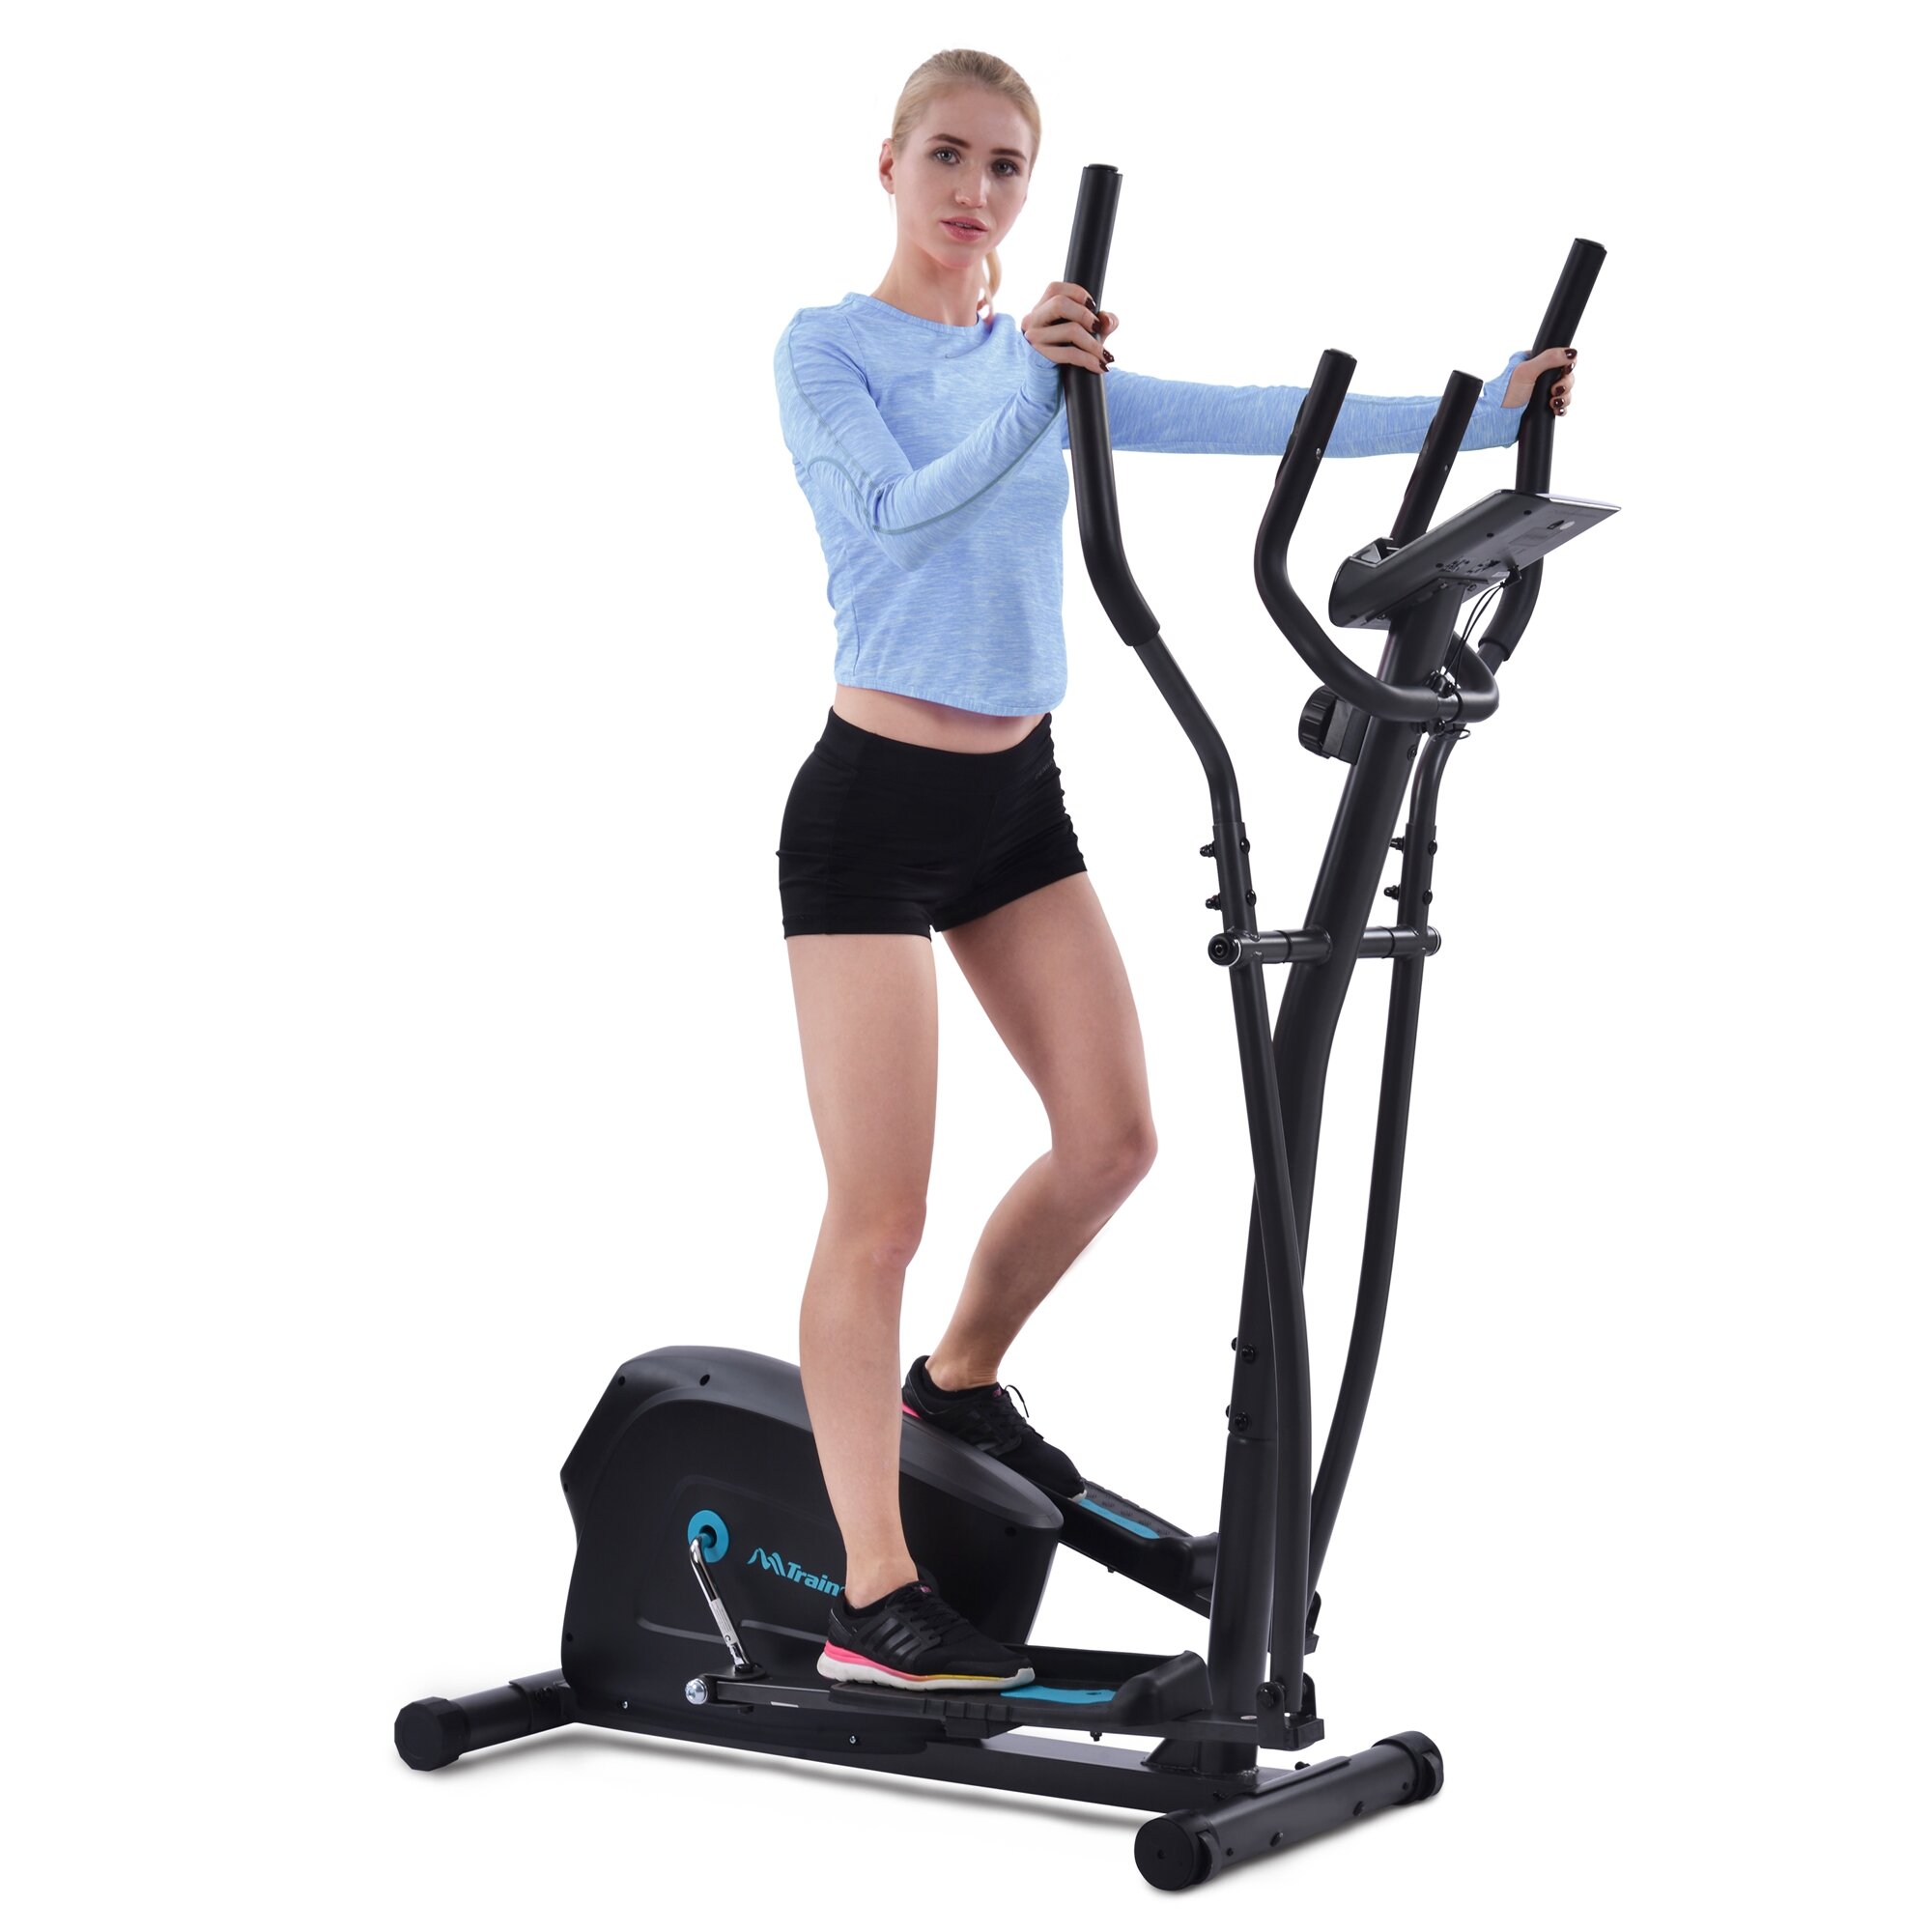 Image of [USA Direct] Bominfit Elliptical Machine Exercise Bike Fitness Cardio Workout Stepping Equipment with 8-Level Magnetic R